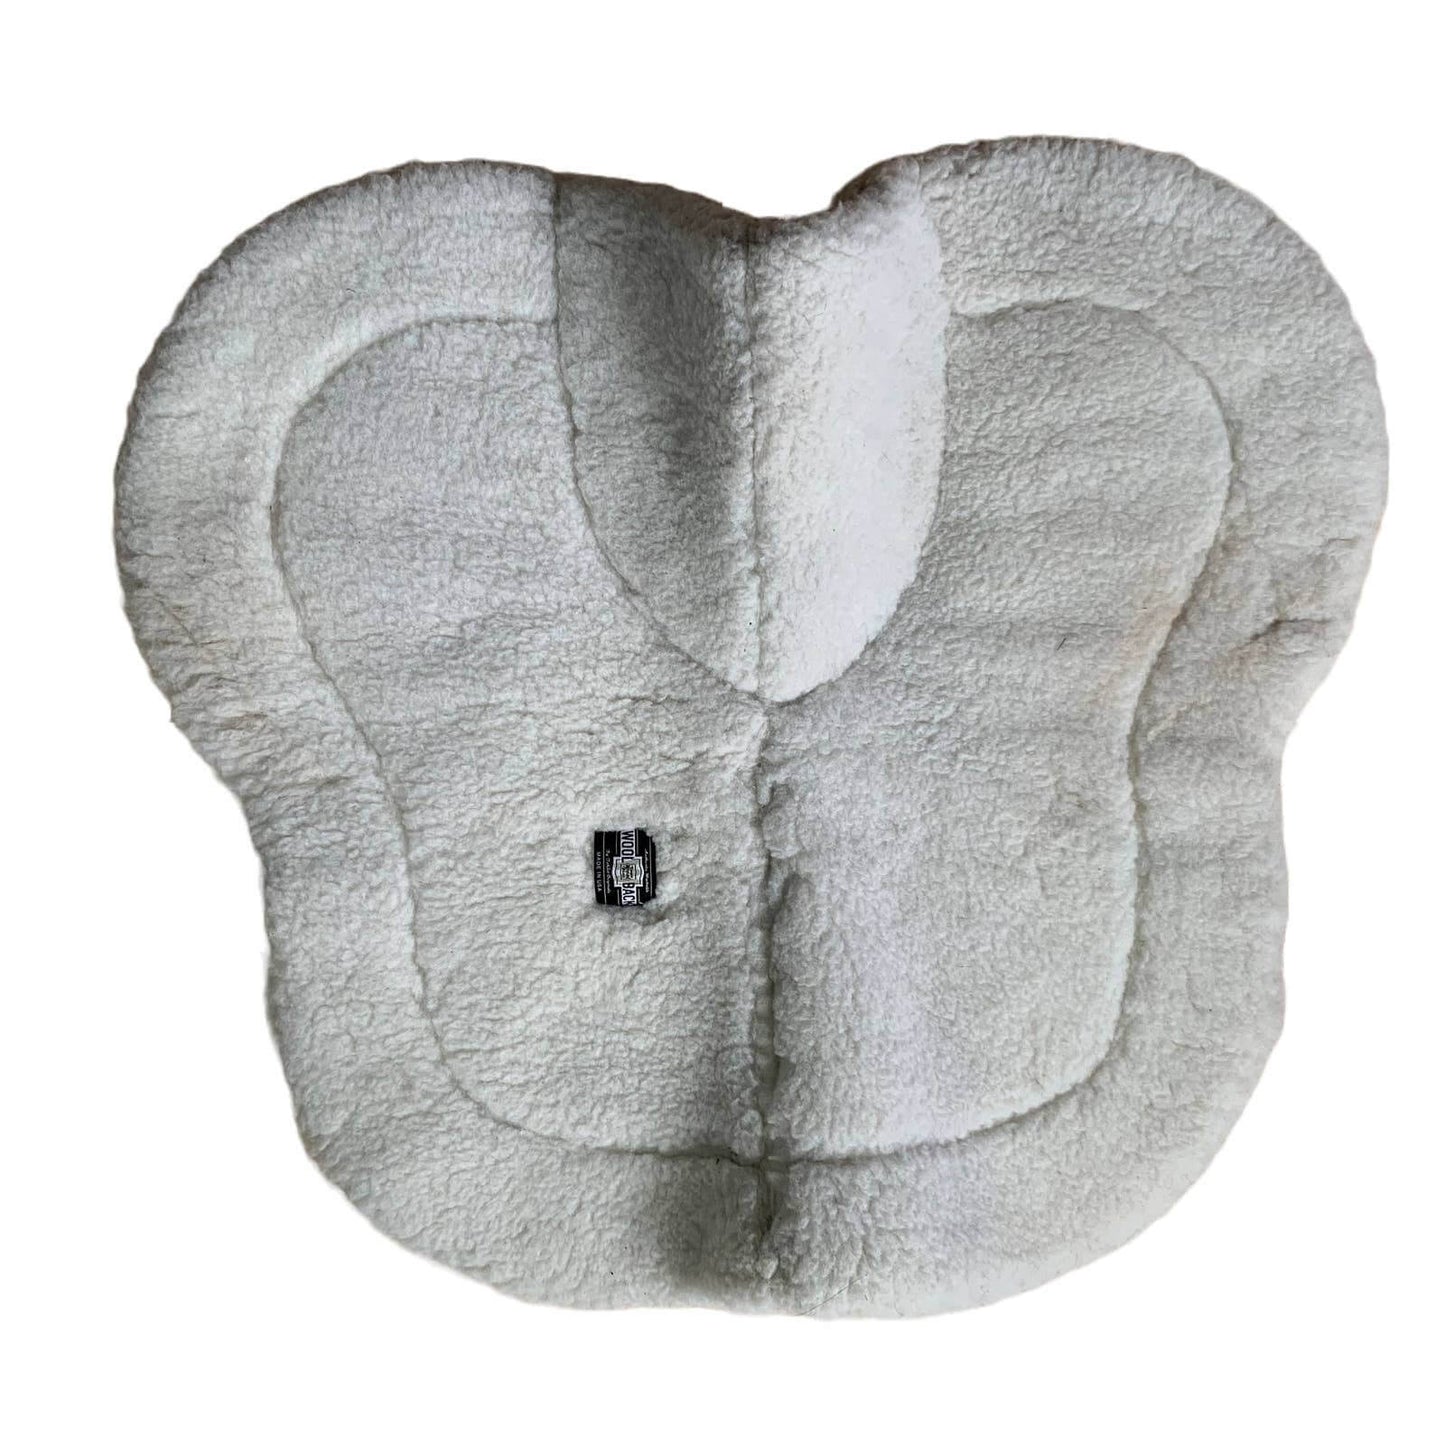 Toklat 'WoolBack CoolBack' High Profile Barrel Pad in White - Horse